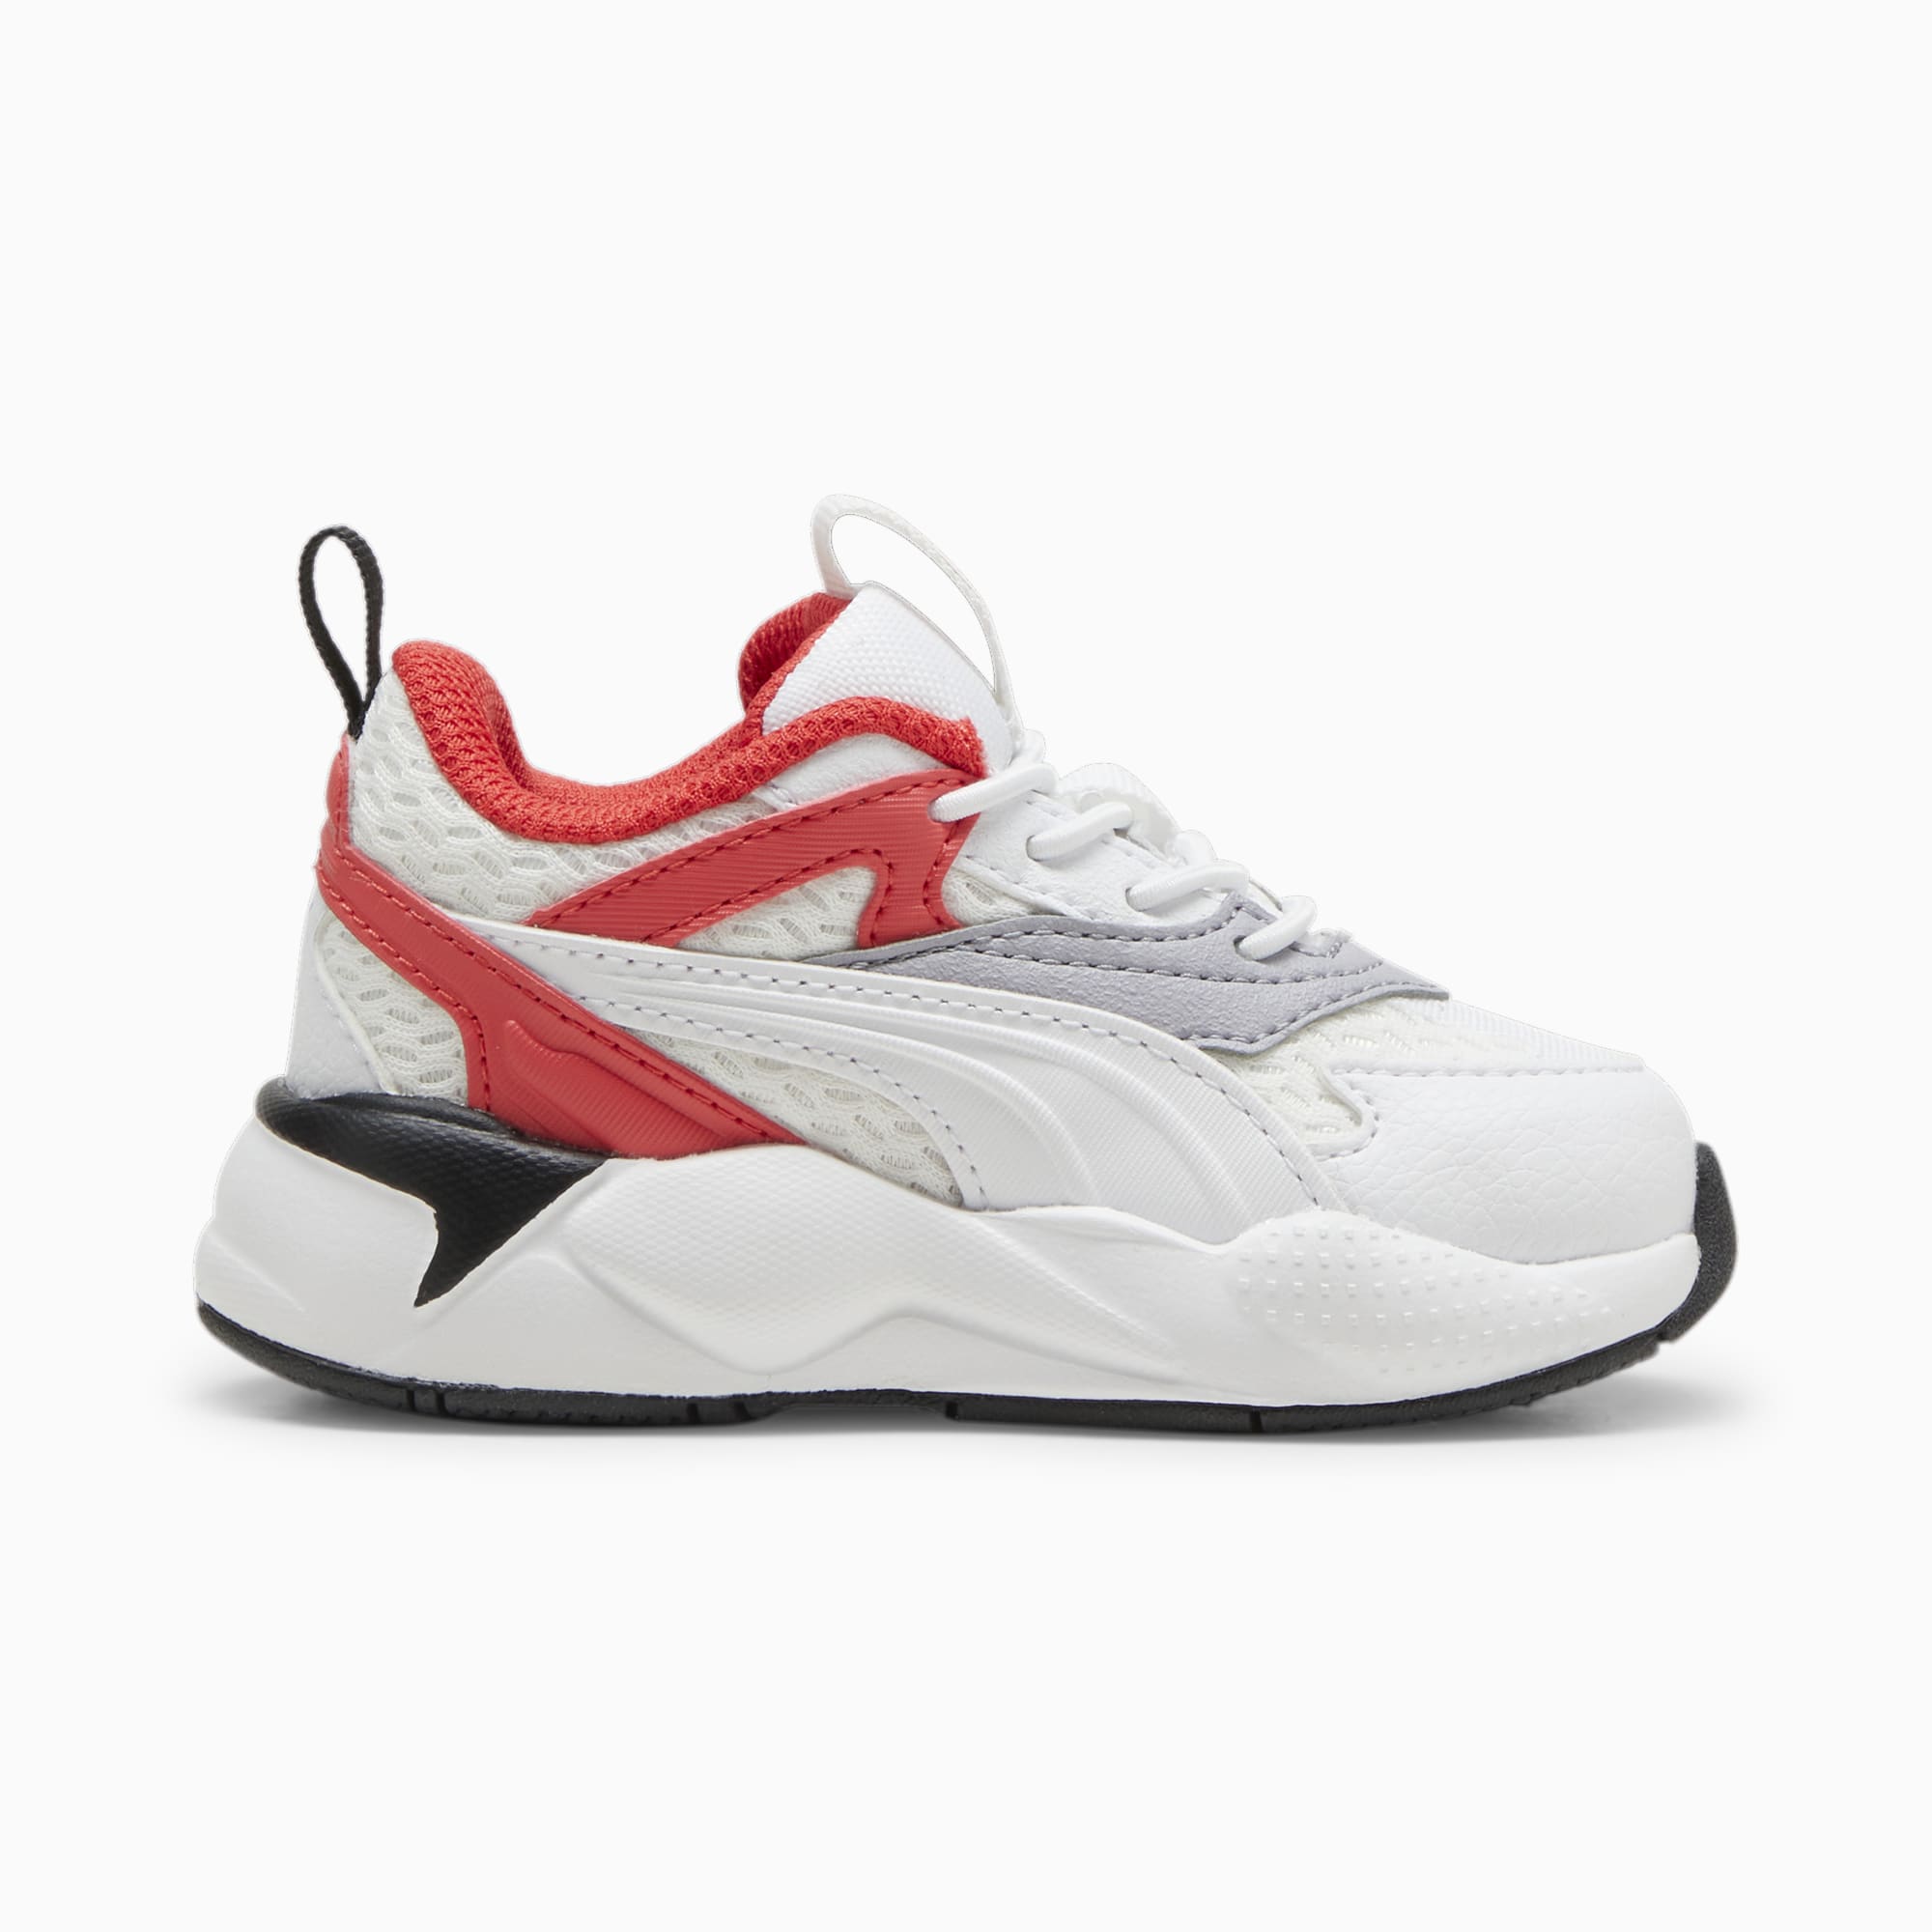 PUMA Rs-X Efekt Toddlers' Sneakers, White/Active Red, Size 19, Shoes